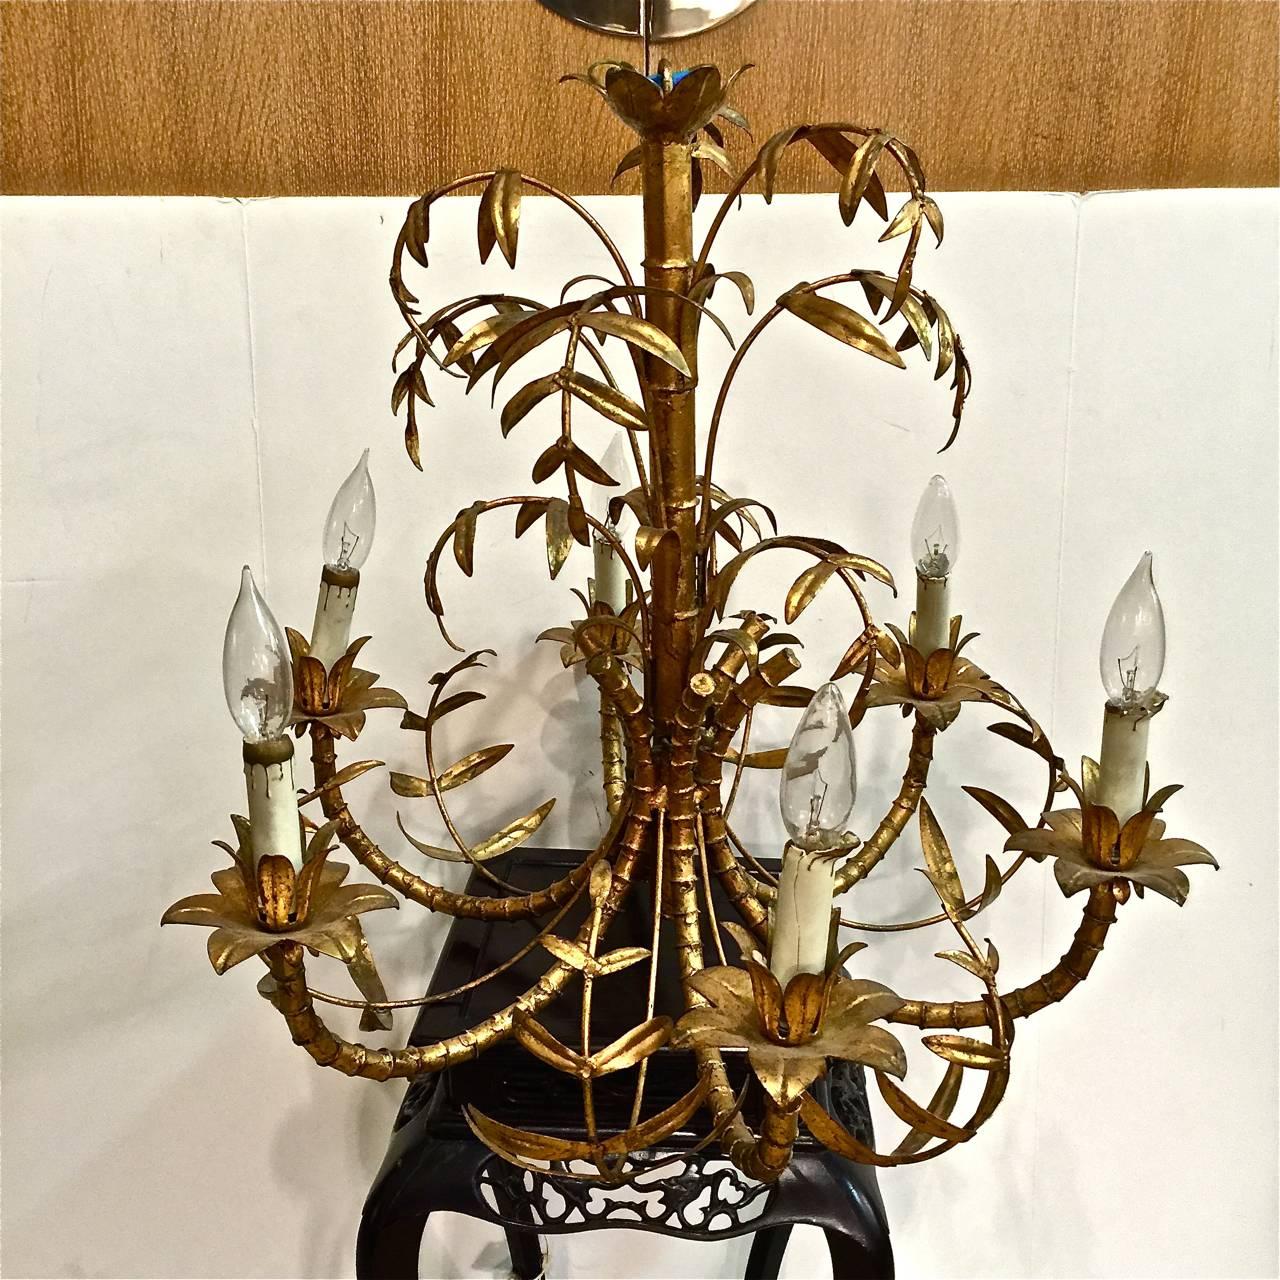 This is a charming small-scale faux bamboo chandelier that dates to circa 1960. The chandelier is well-detailed and retains its original gold leaf and is in very good condition. Height measurement is to top of chandelier, excluding chain.